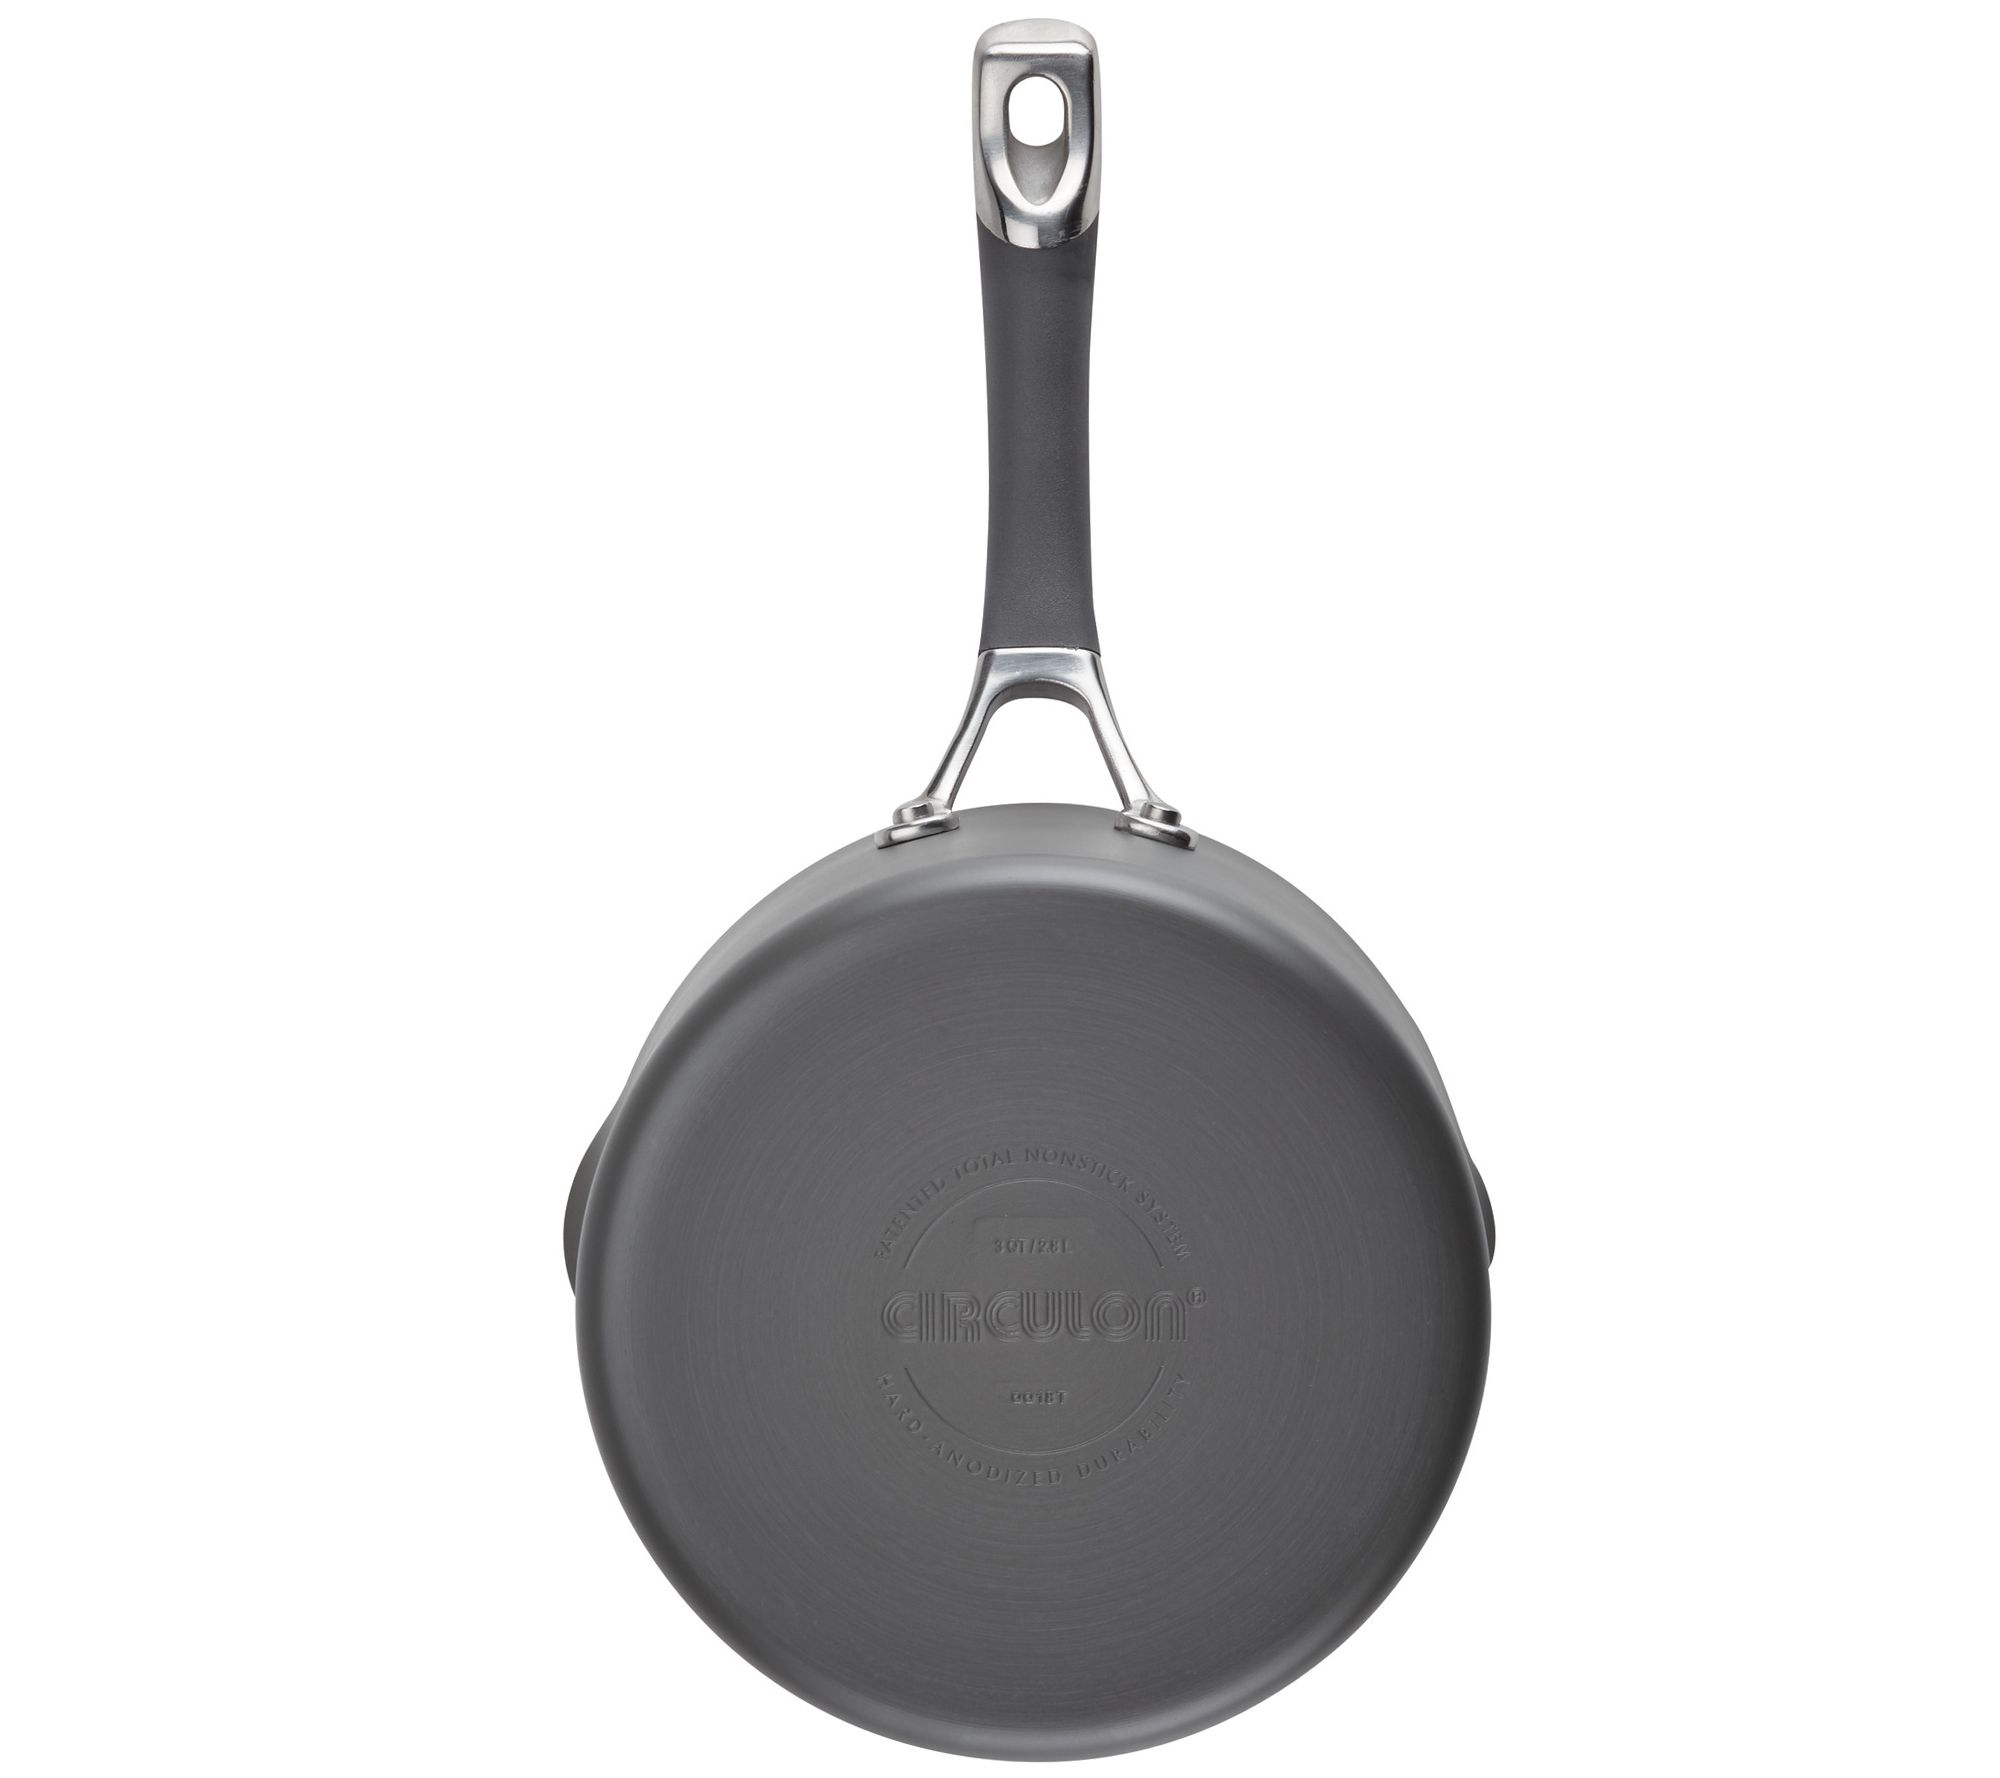 Circulon Radiance 14 Nonstick Hard Anodized Frying Pan With